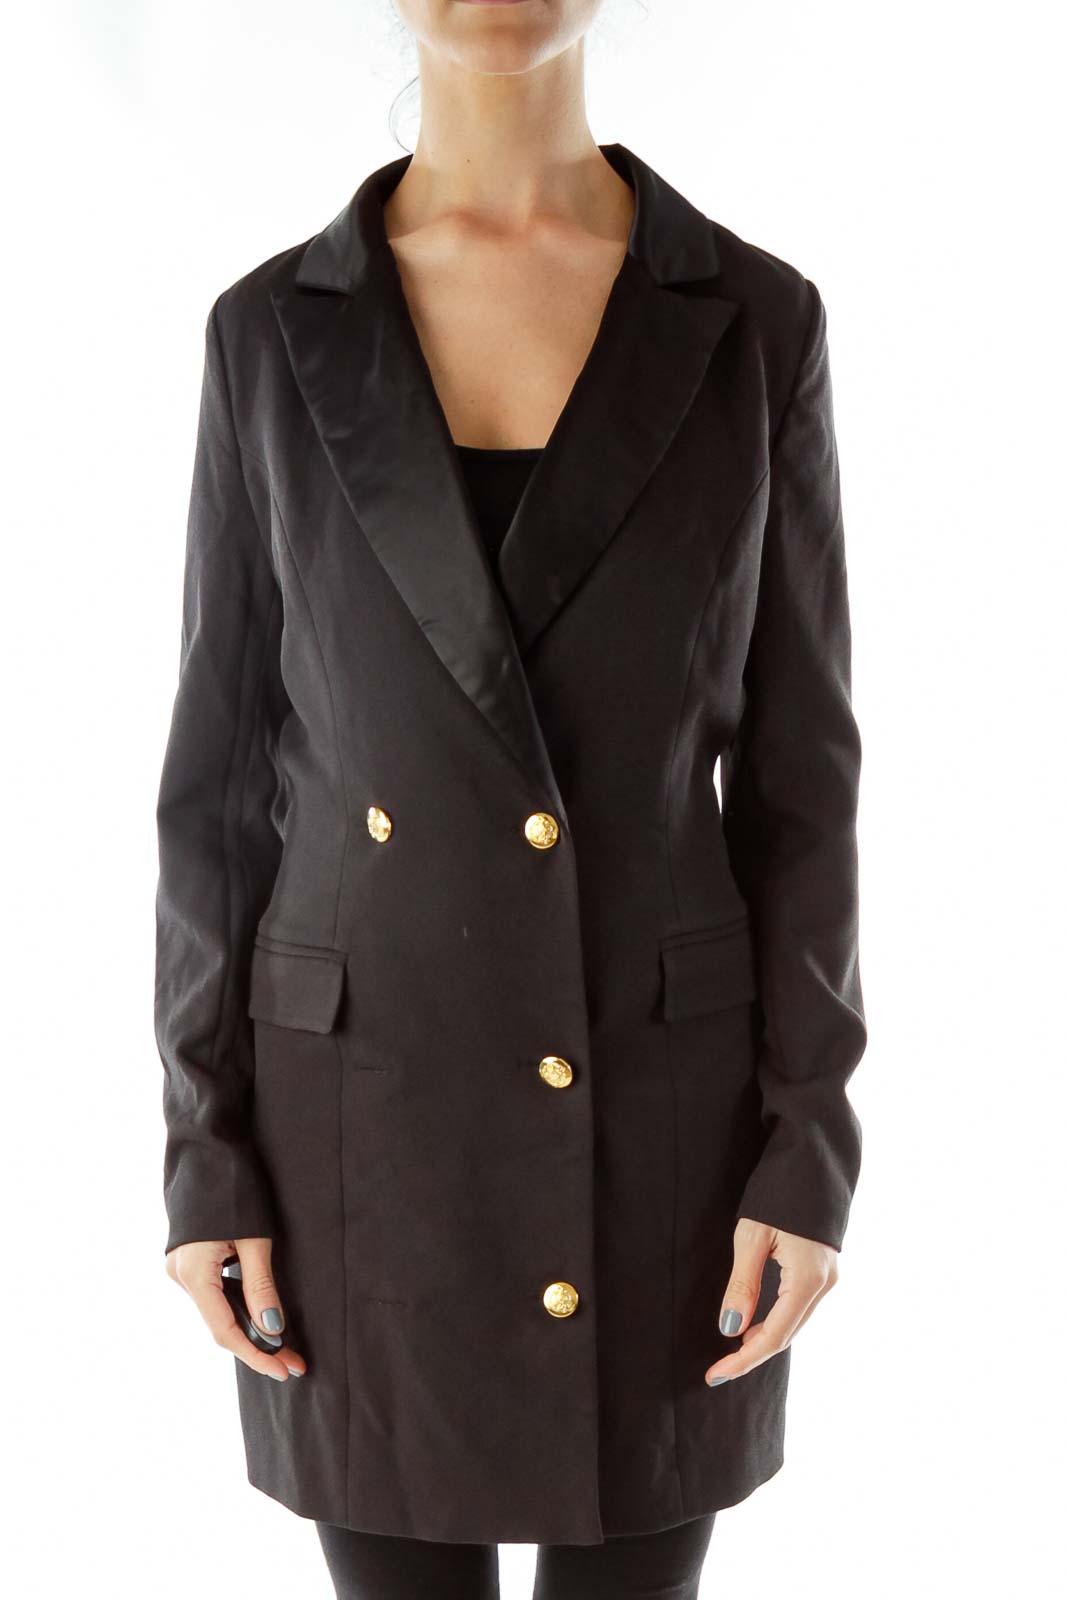 Black Long Coat with Gold Buttons Front